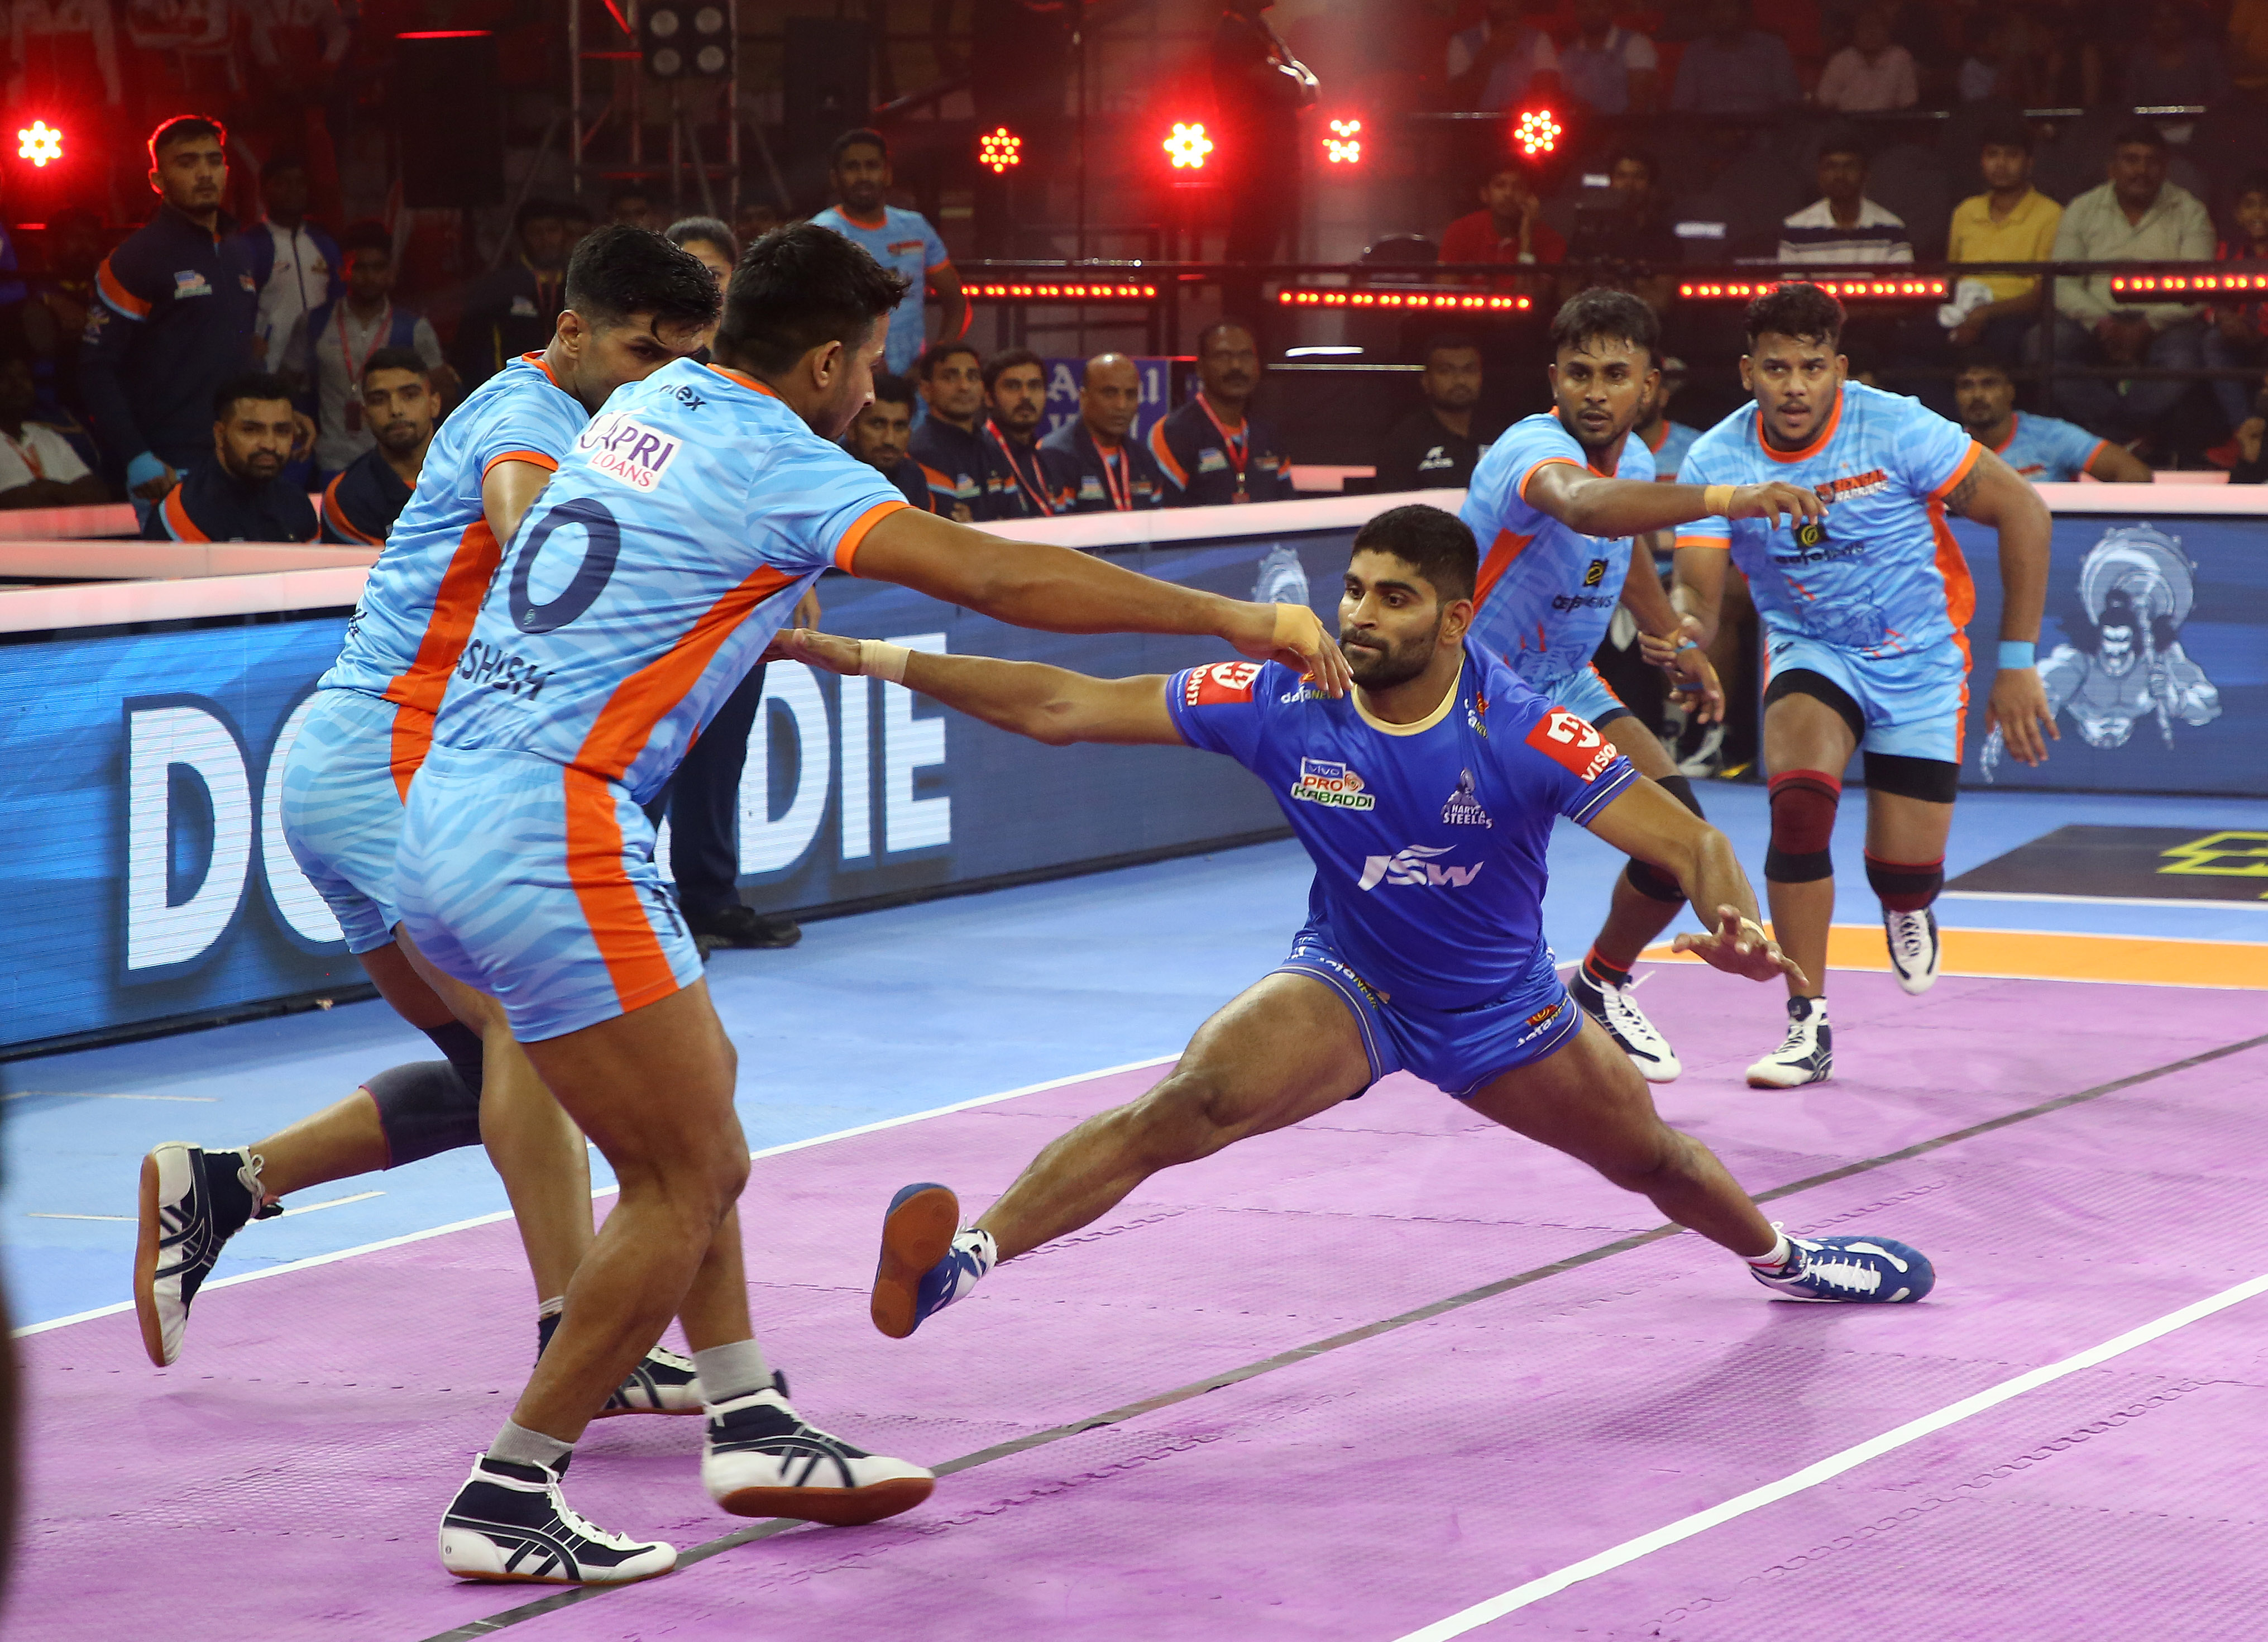 PKL 2022 LIVE: Winless Tamil Thalaivas and Patna Patna set up clash on Day 10 while Dabang Delhi aim fifth successive victory as they face Haryana Steelers in Pro Kabaddi League 9 - Follow LIVE updates